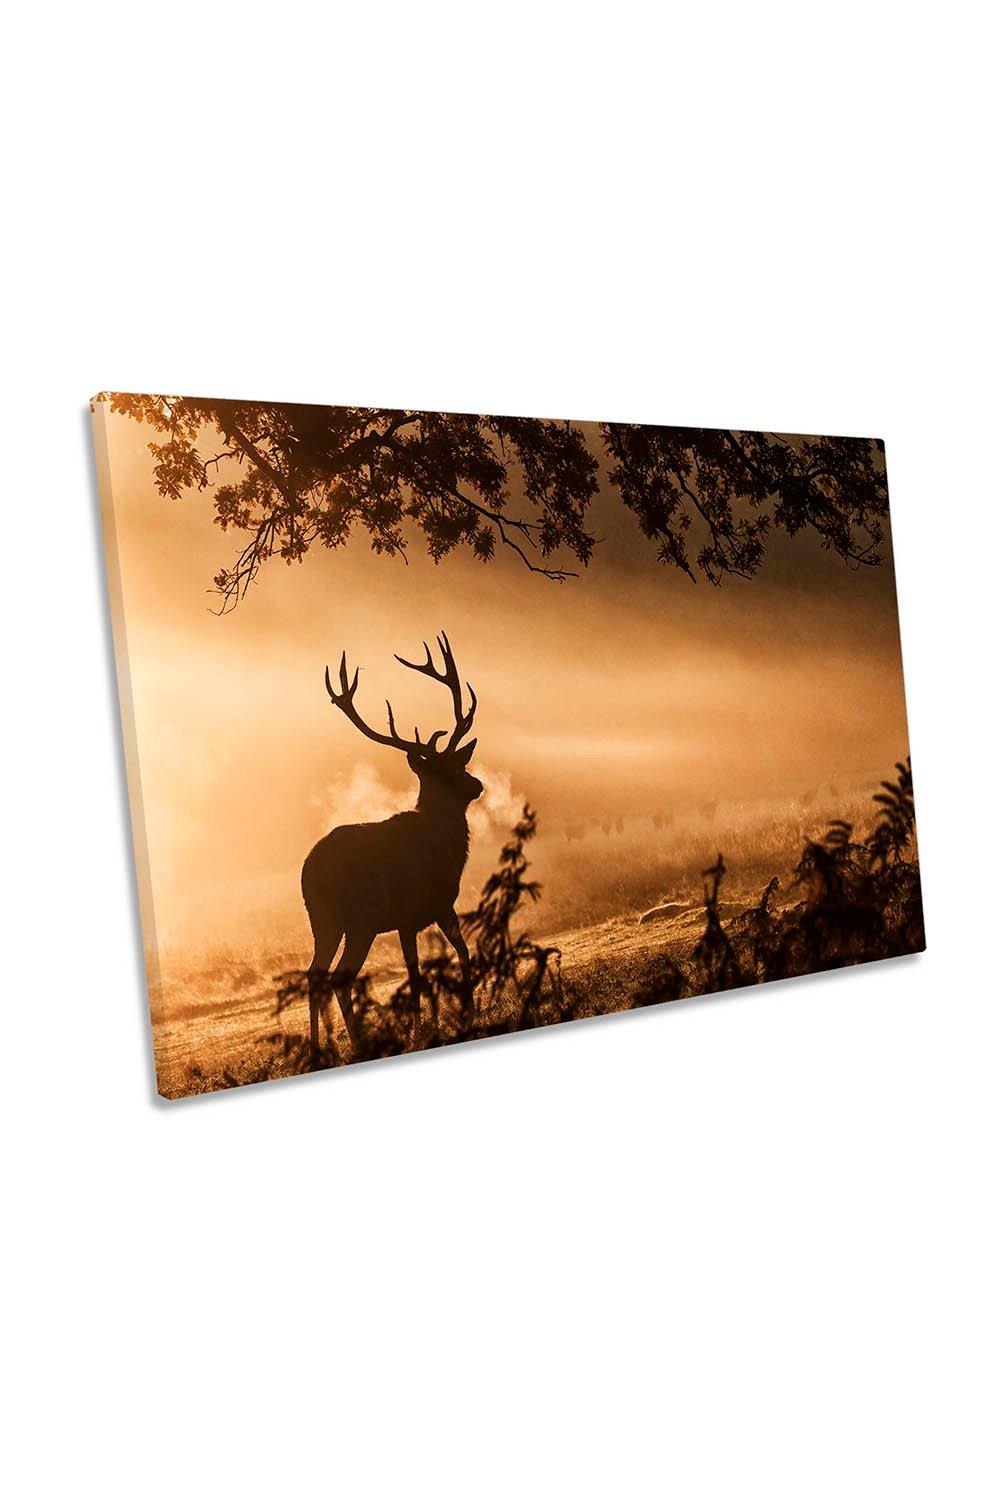 Deer Stag Antlers Sunset Canvas Wall Art Picture Print